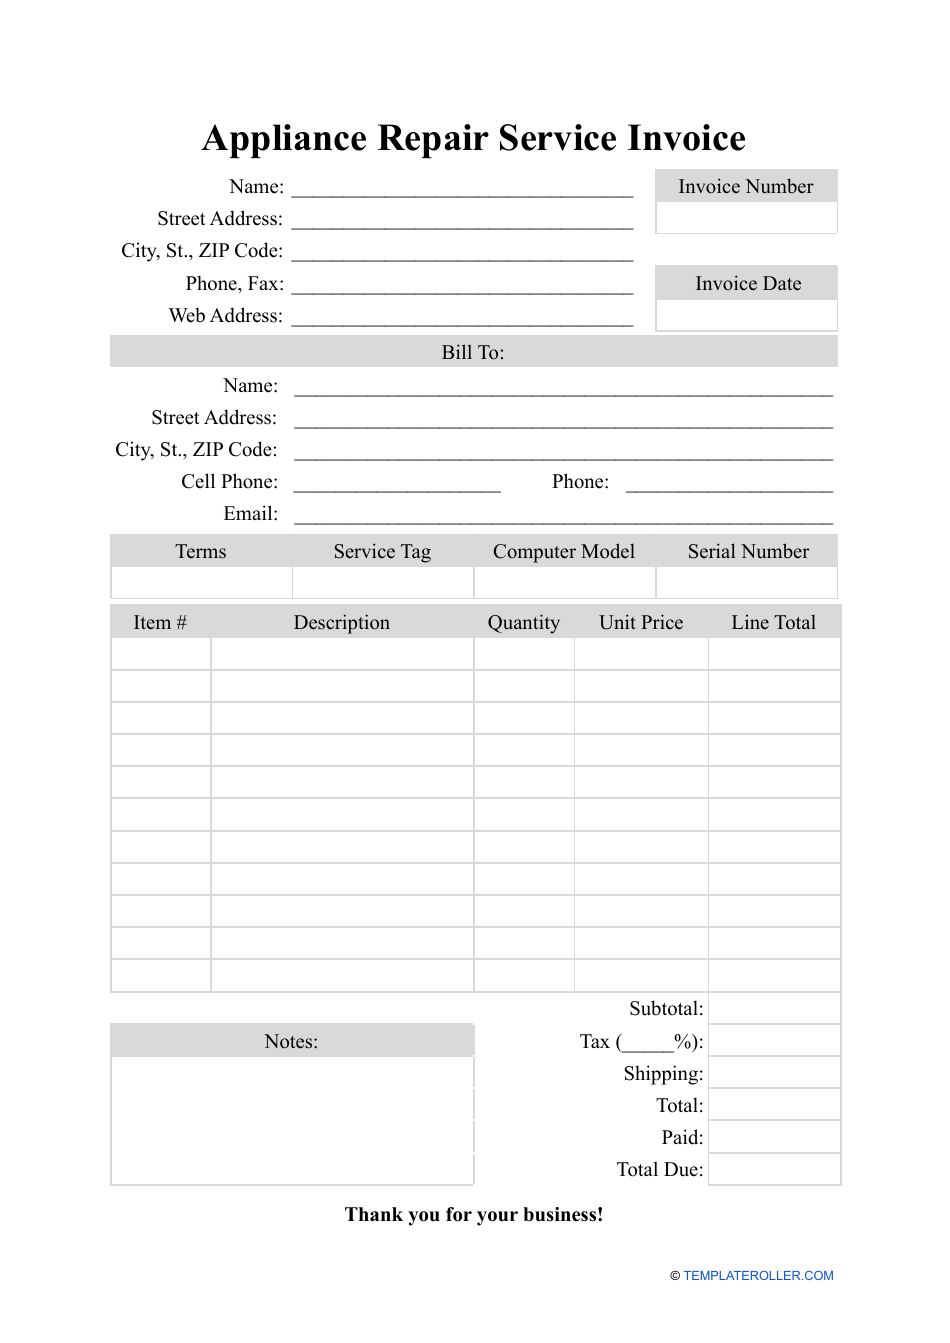 Appliance Repair Service Invoice Template Fill Out, Sign Online and